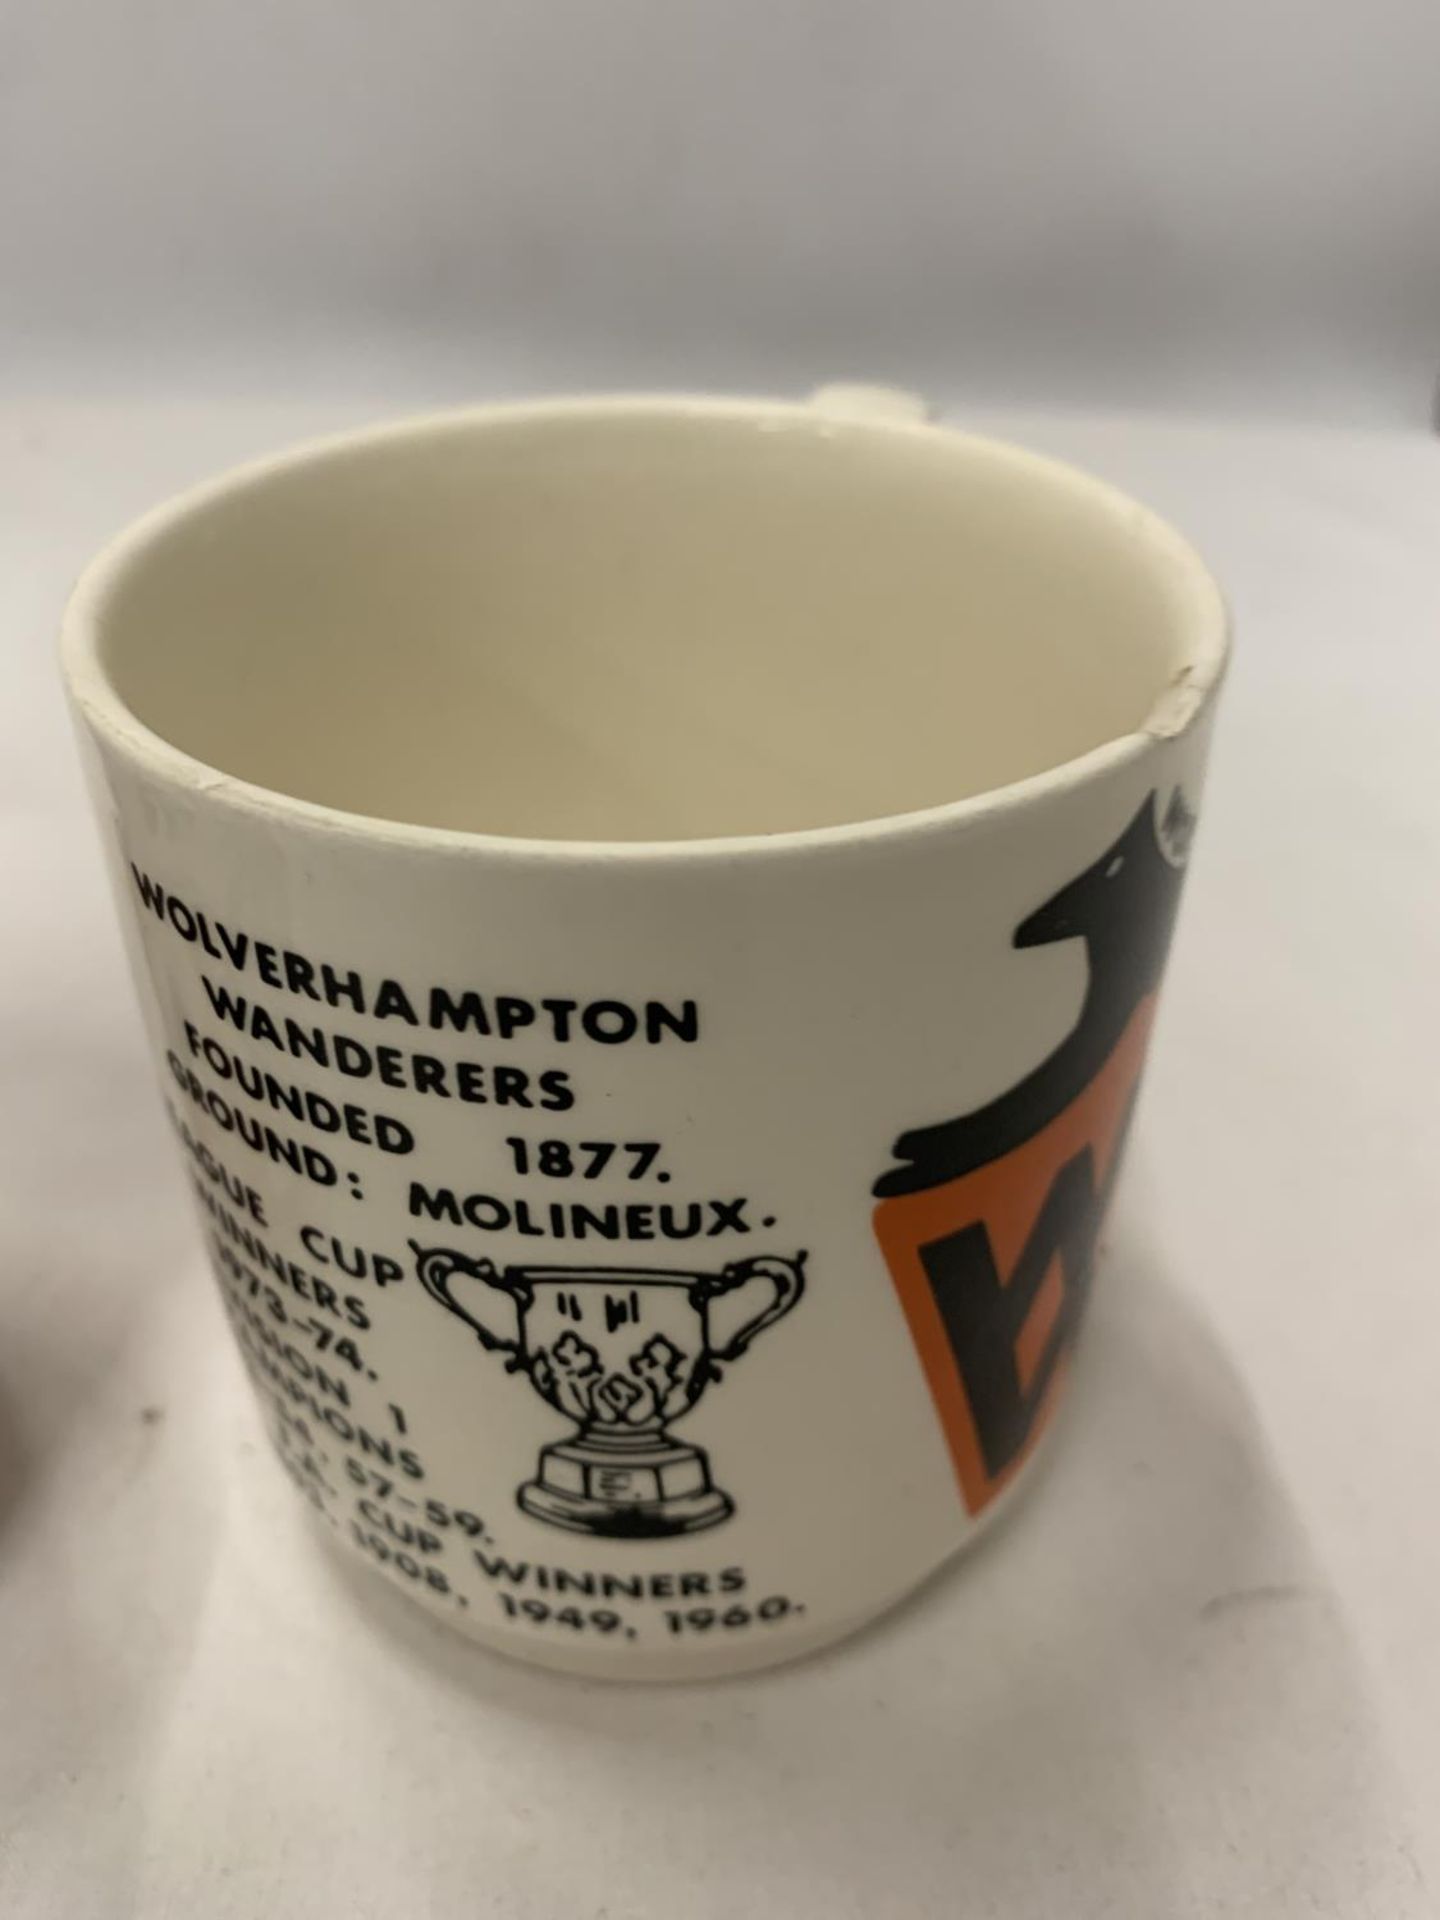 THREE WOLVERHAMPTON WANDERERS MUGS FROM THE 1960'S, 1970'S AND 1980'S - Image 4 of 4